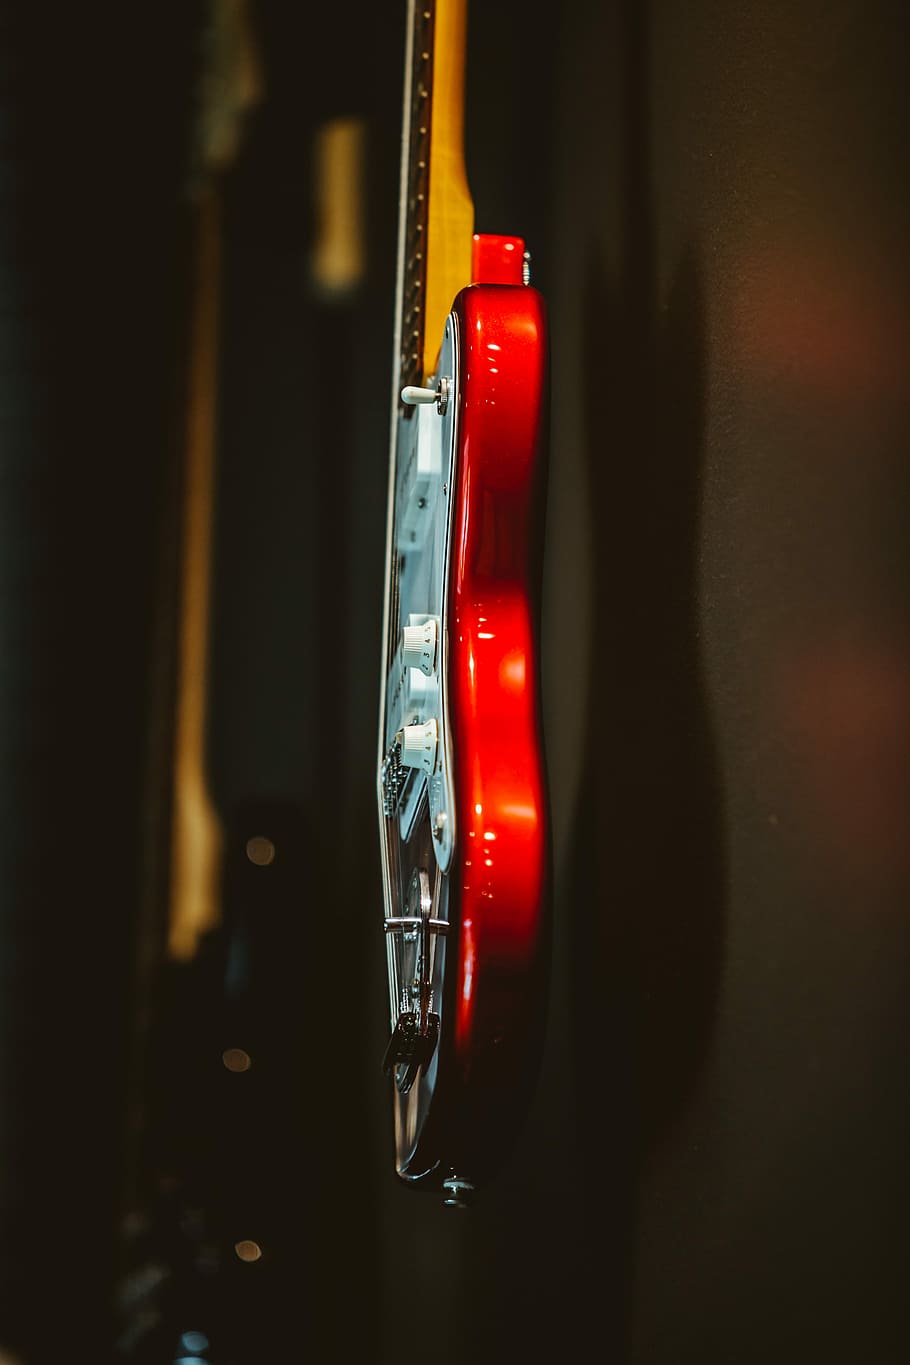 white and red stratocaster electric guitar hanging on wall, shallow focus photography of red and white electric guitar